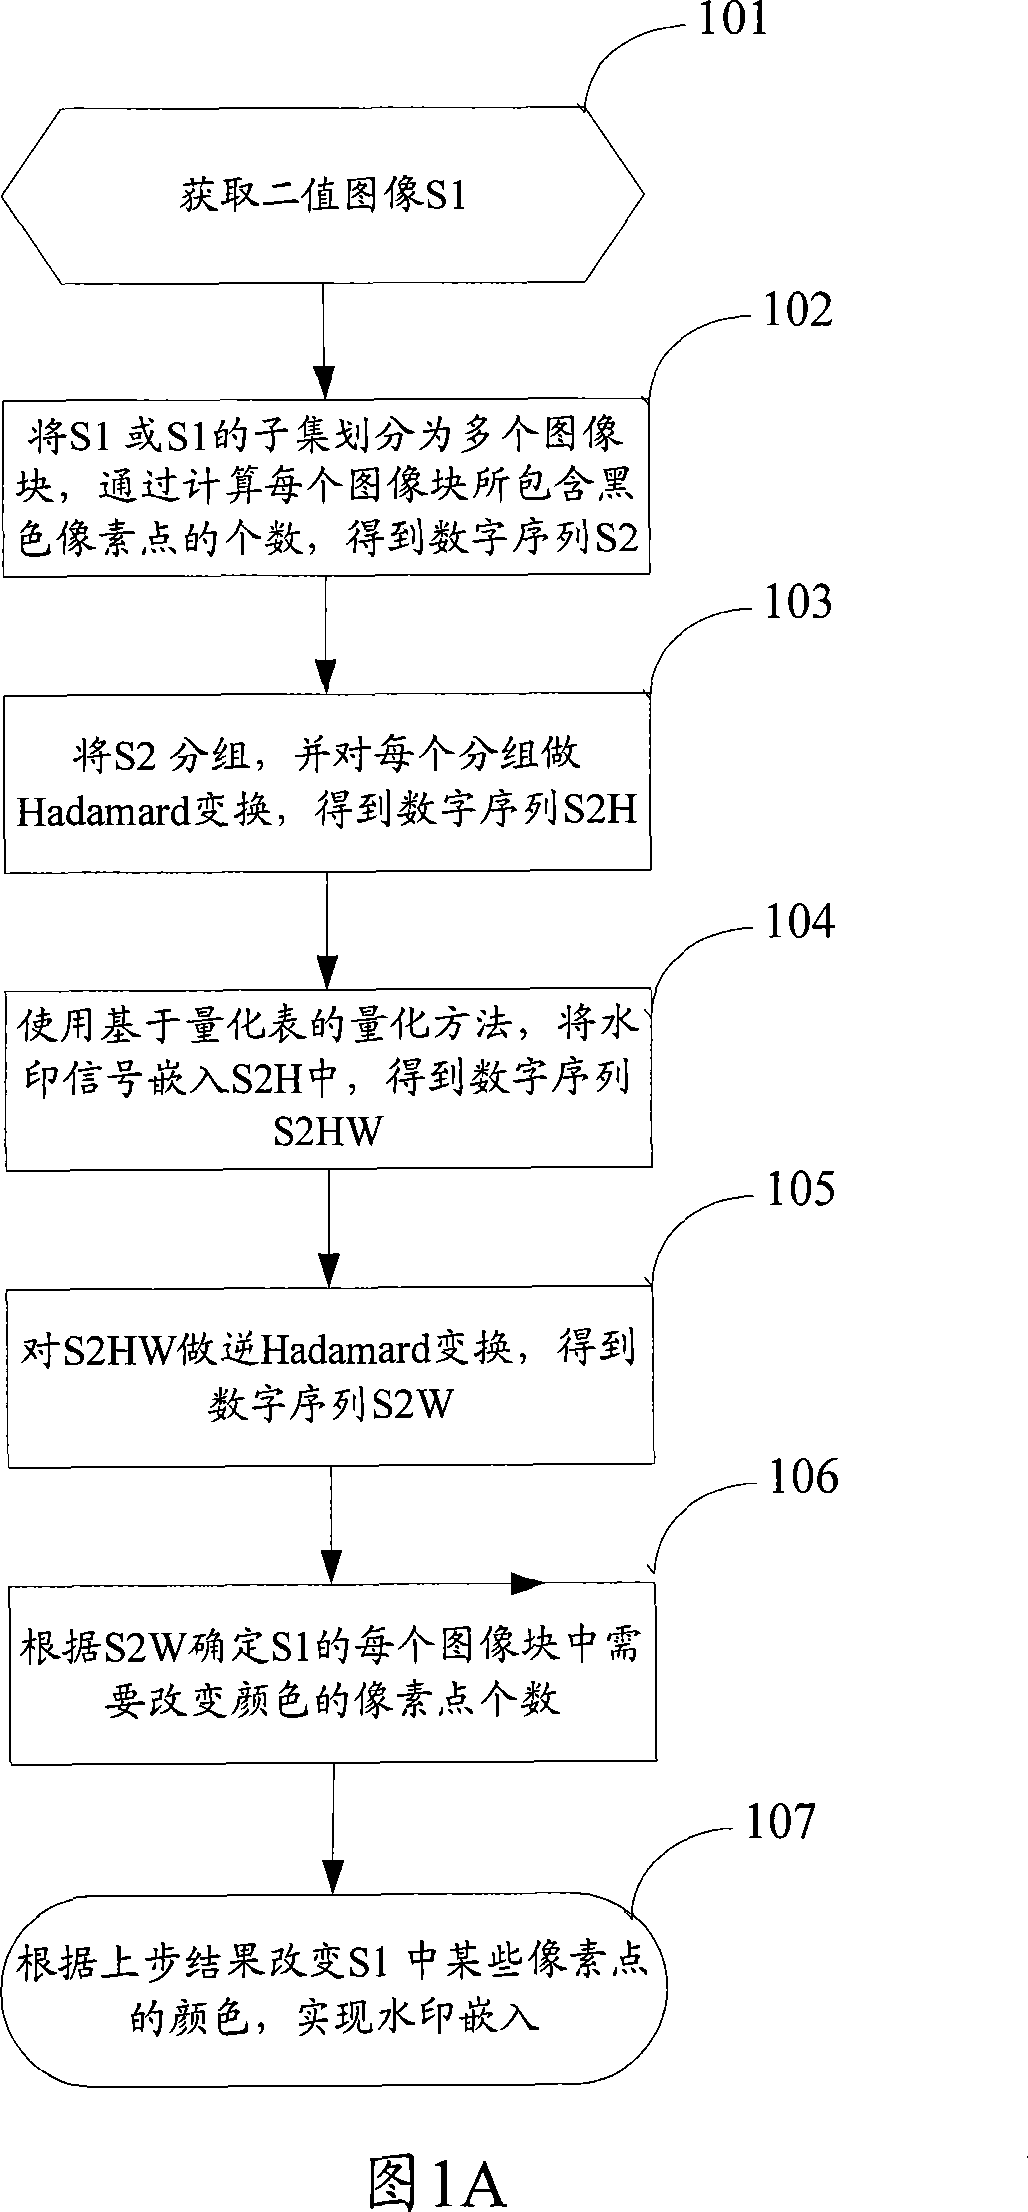 Binary image digit water mark embedding, extraction method and device